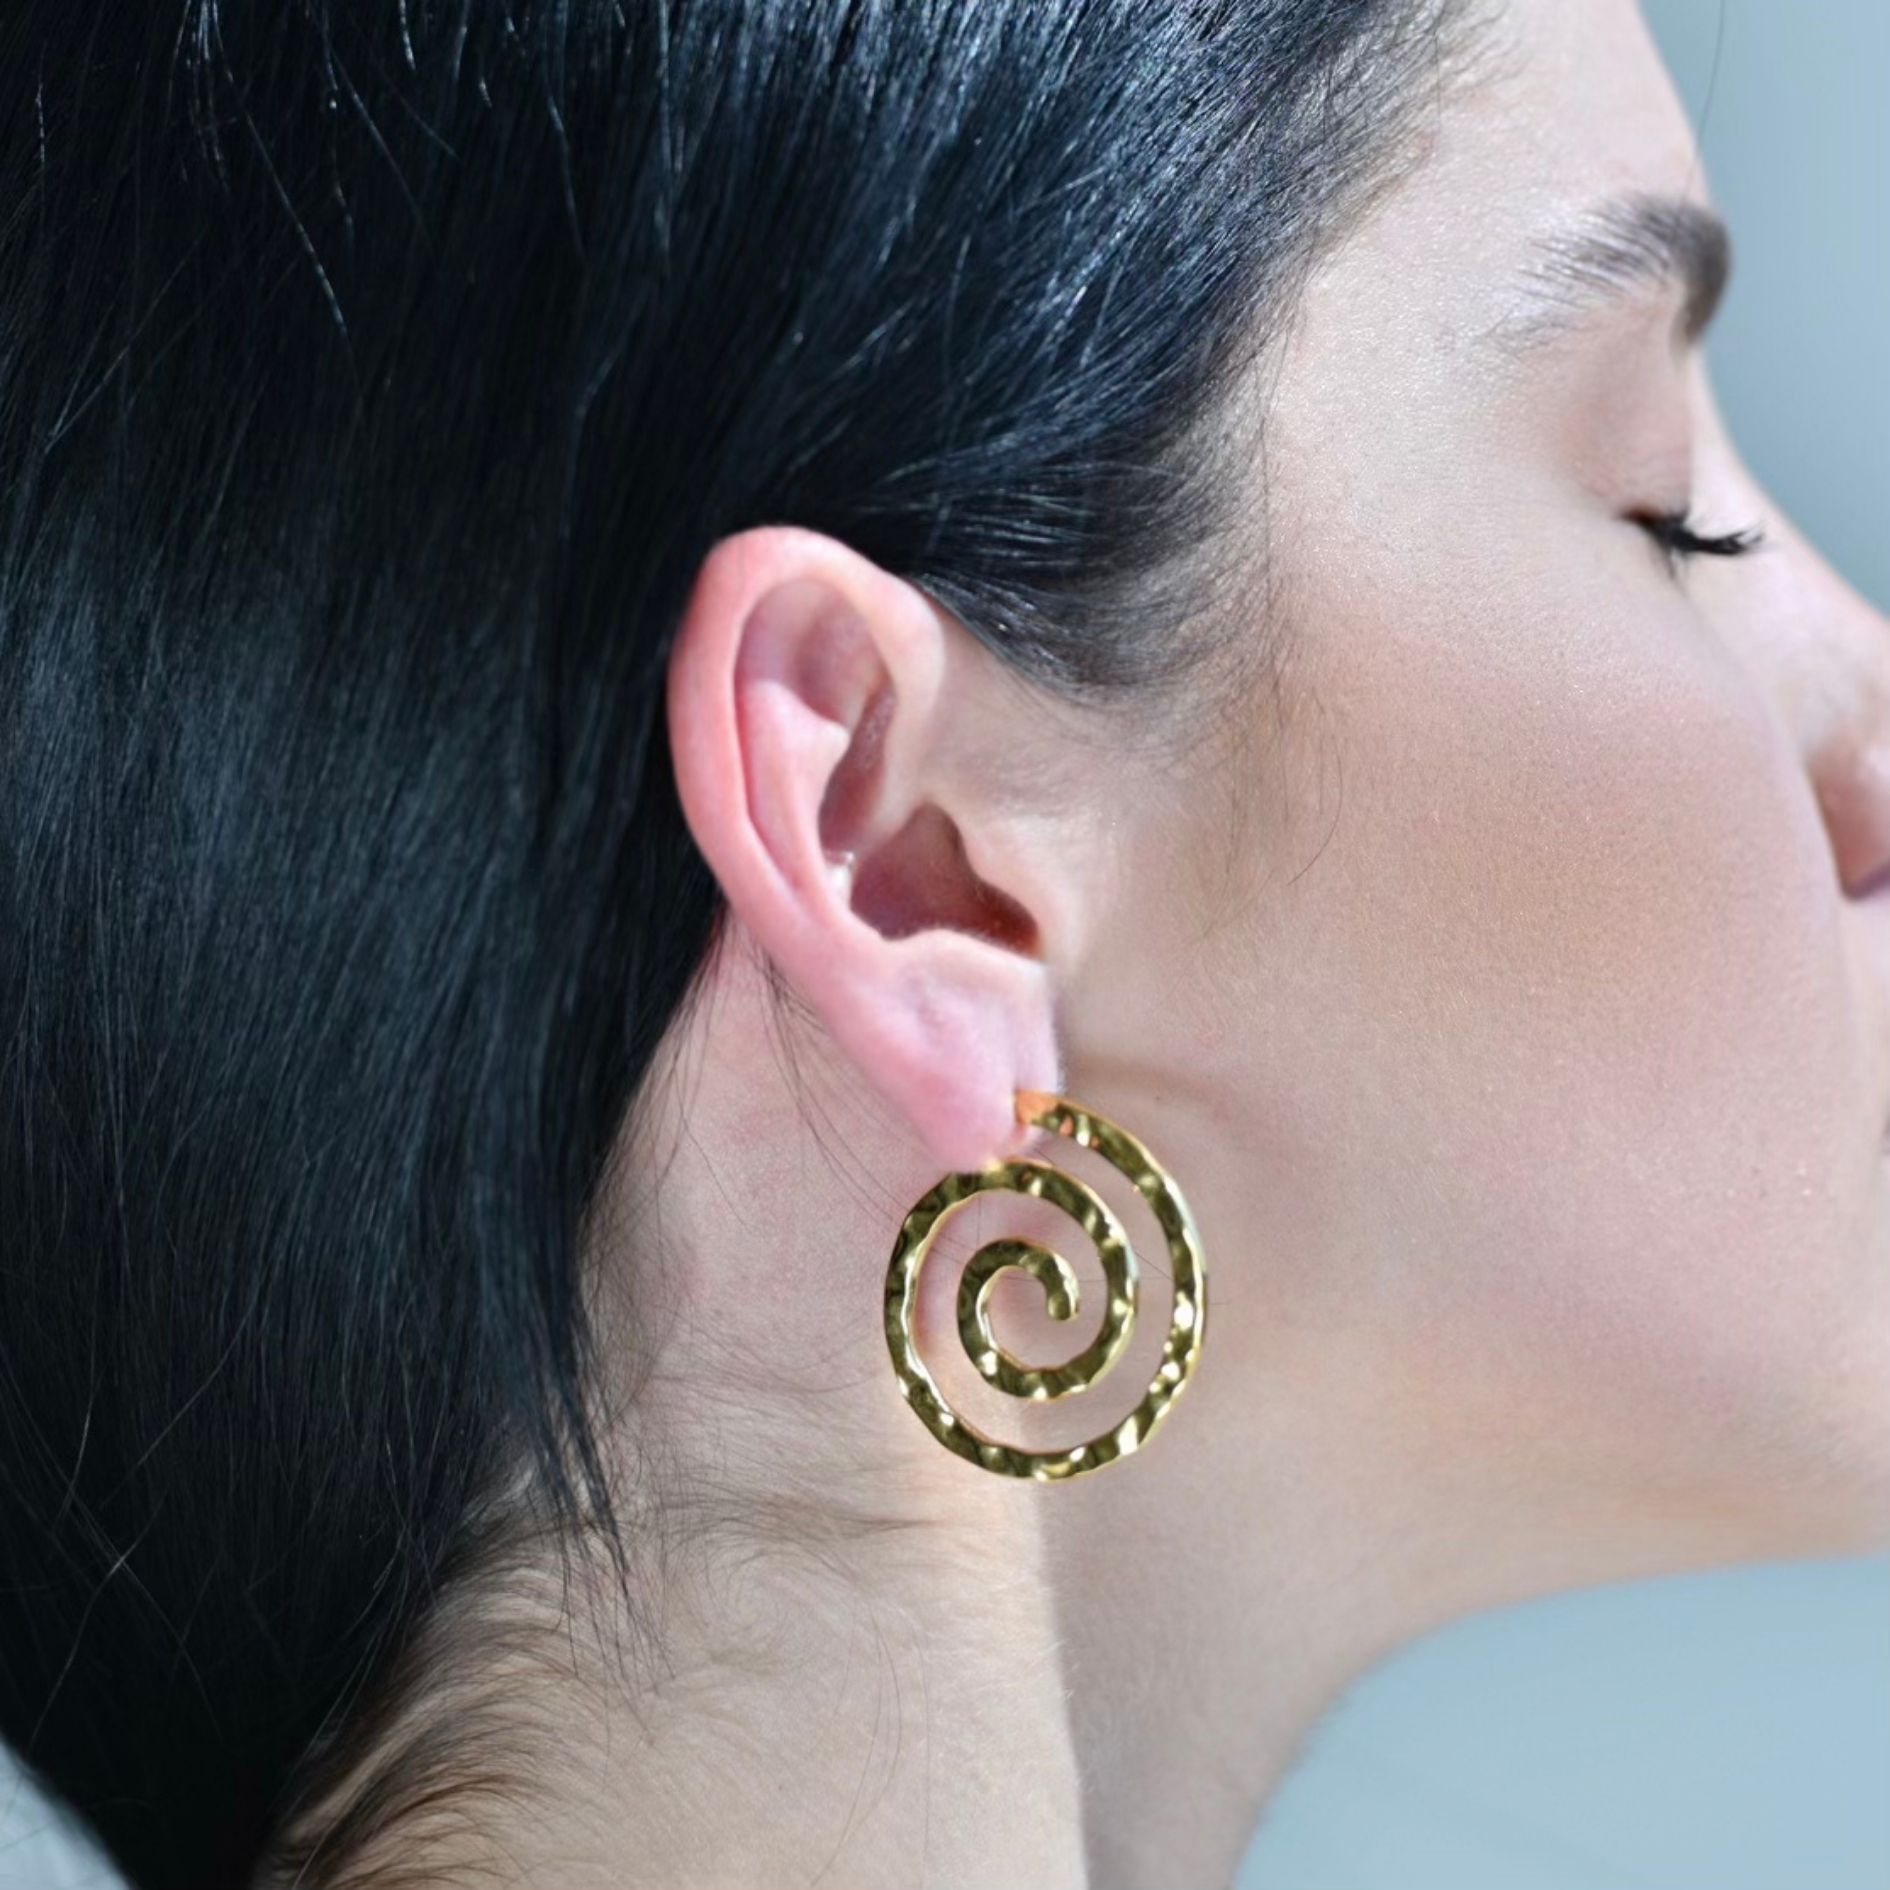 Gold plated hoop earrings with the shape of a spiral. The surface testure is irregular.